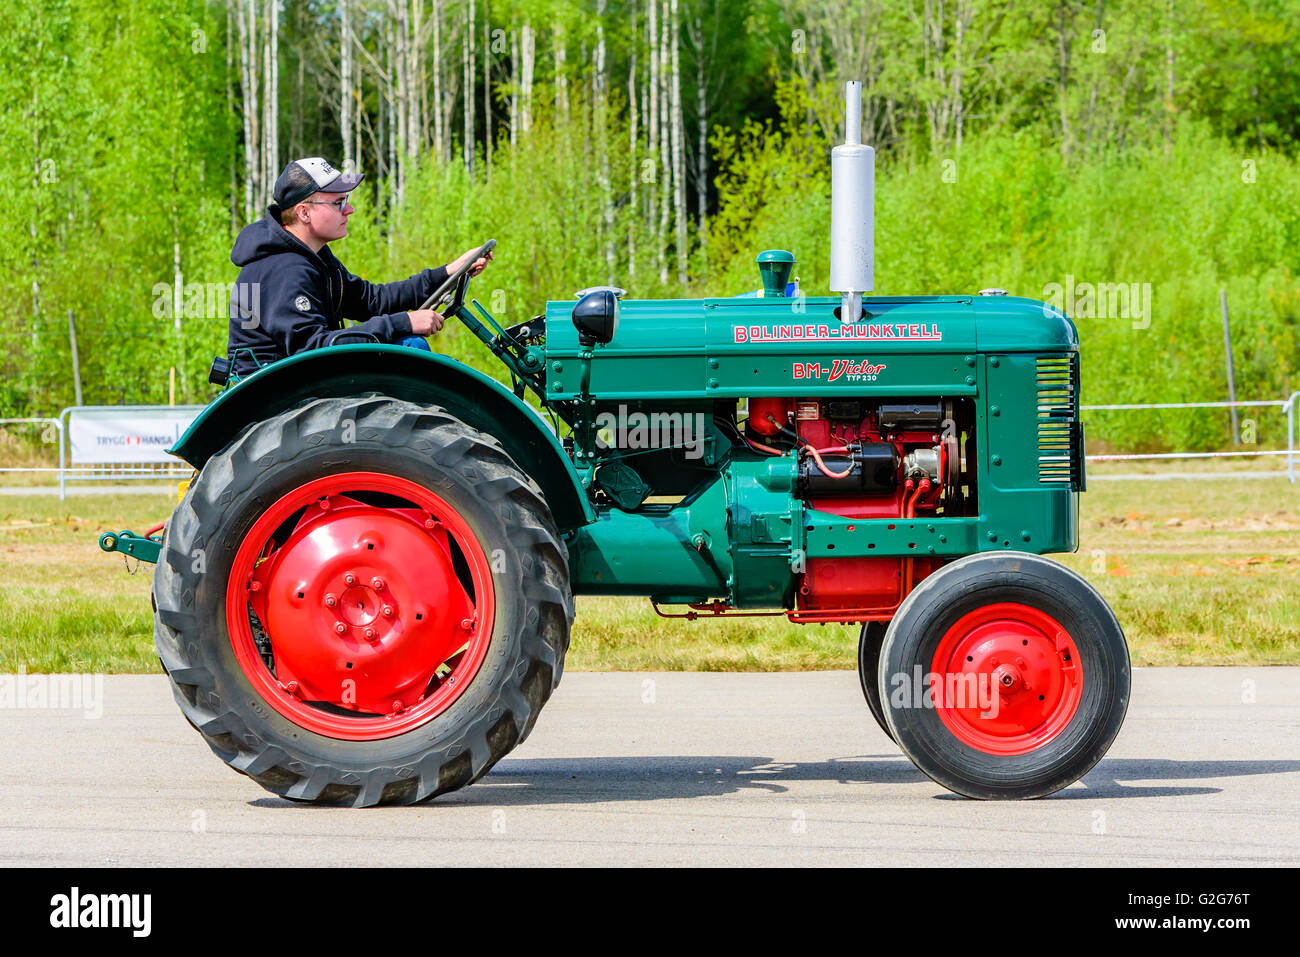 Emmaboda, Sweden - May 14, 2016: Forest and tractor (Skog och traktor) fair. Vintage classic tractors on parade. Here a green an Stock Photo